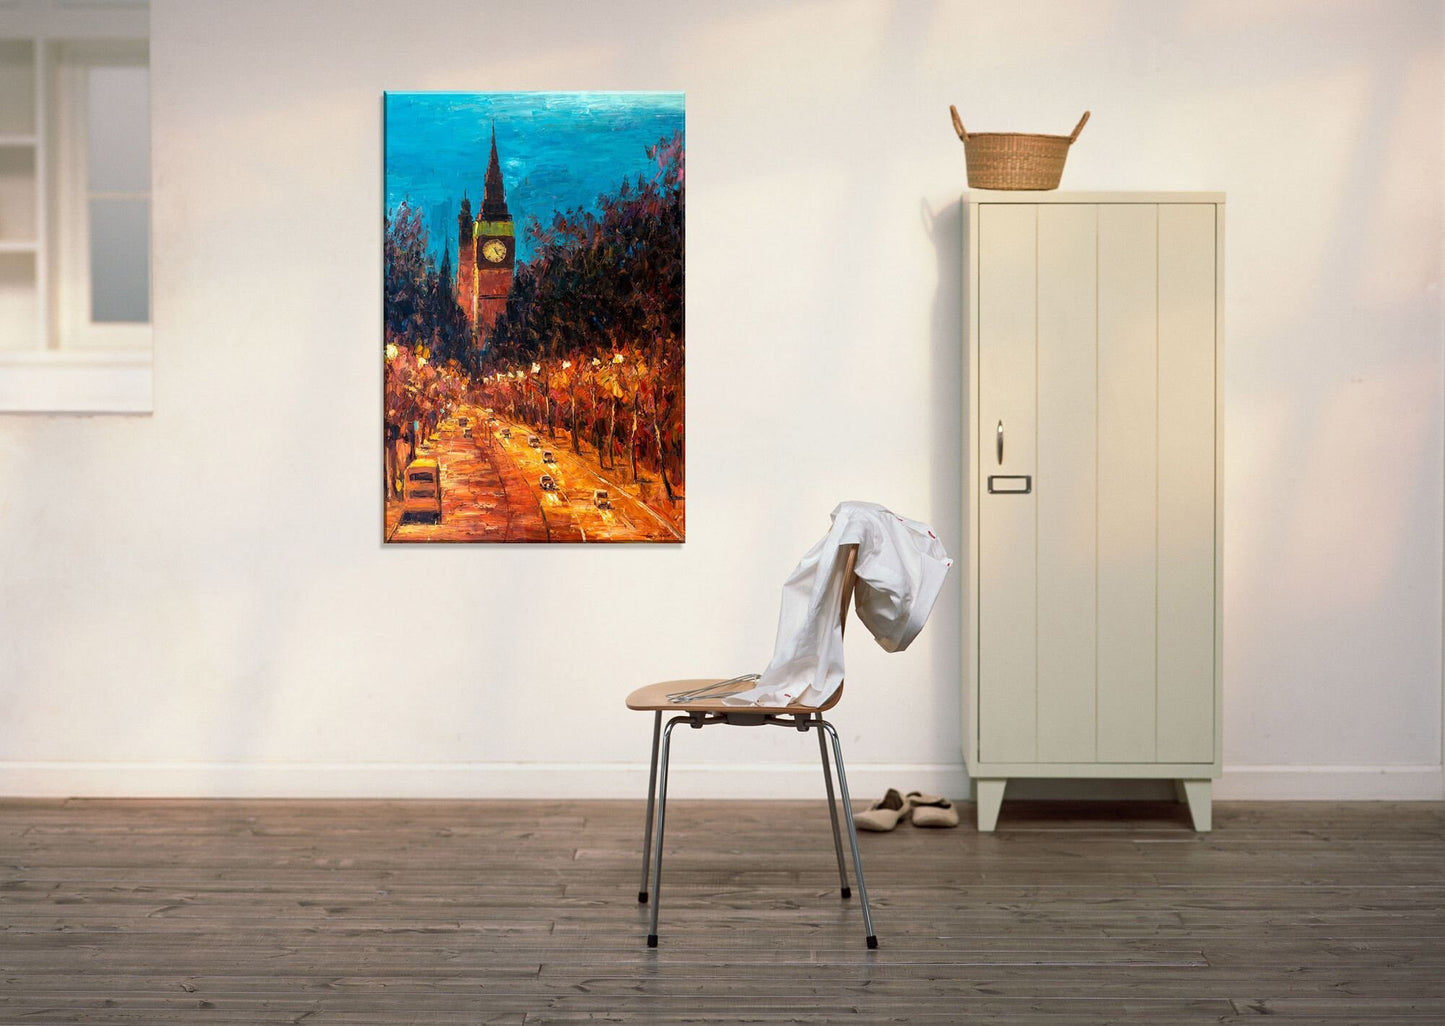 Original Oil Painting London Tower Street at Night, Painting Abstract, Wall Decor, Large Art, Master Bedroom Decor, Palette Knife Modern Art